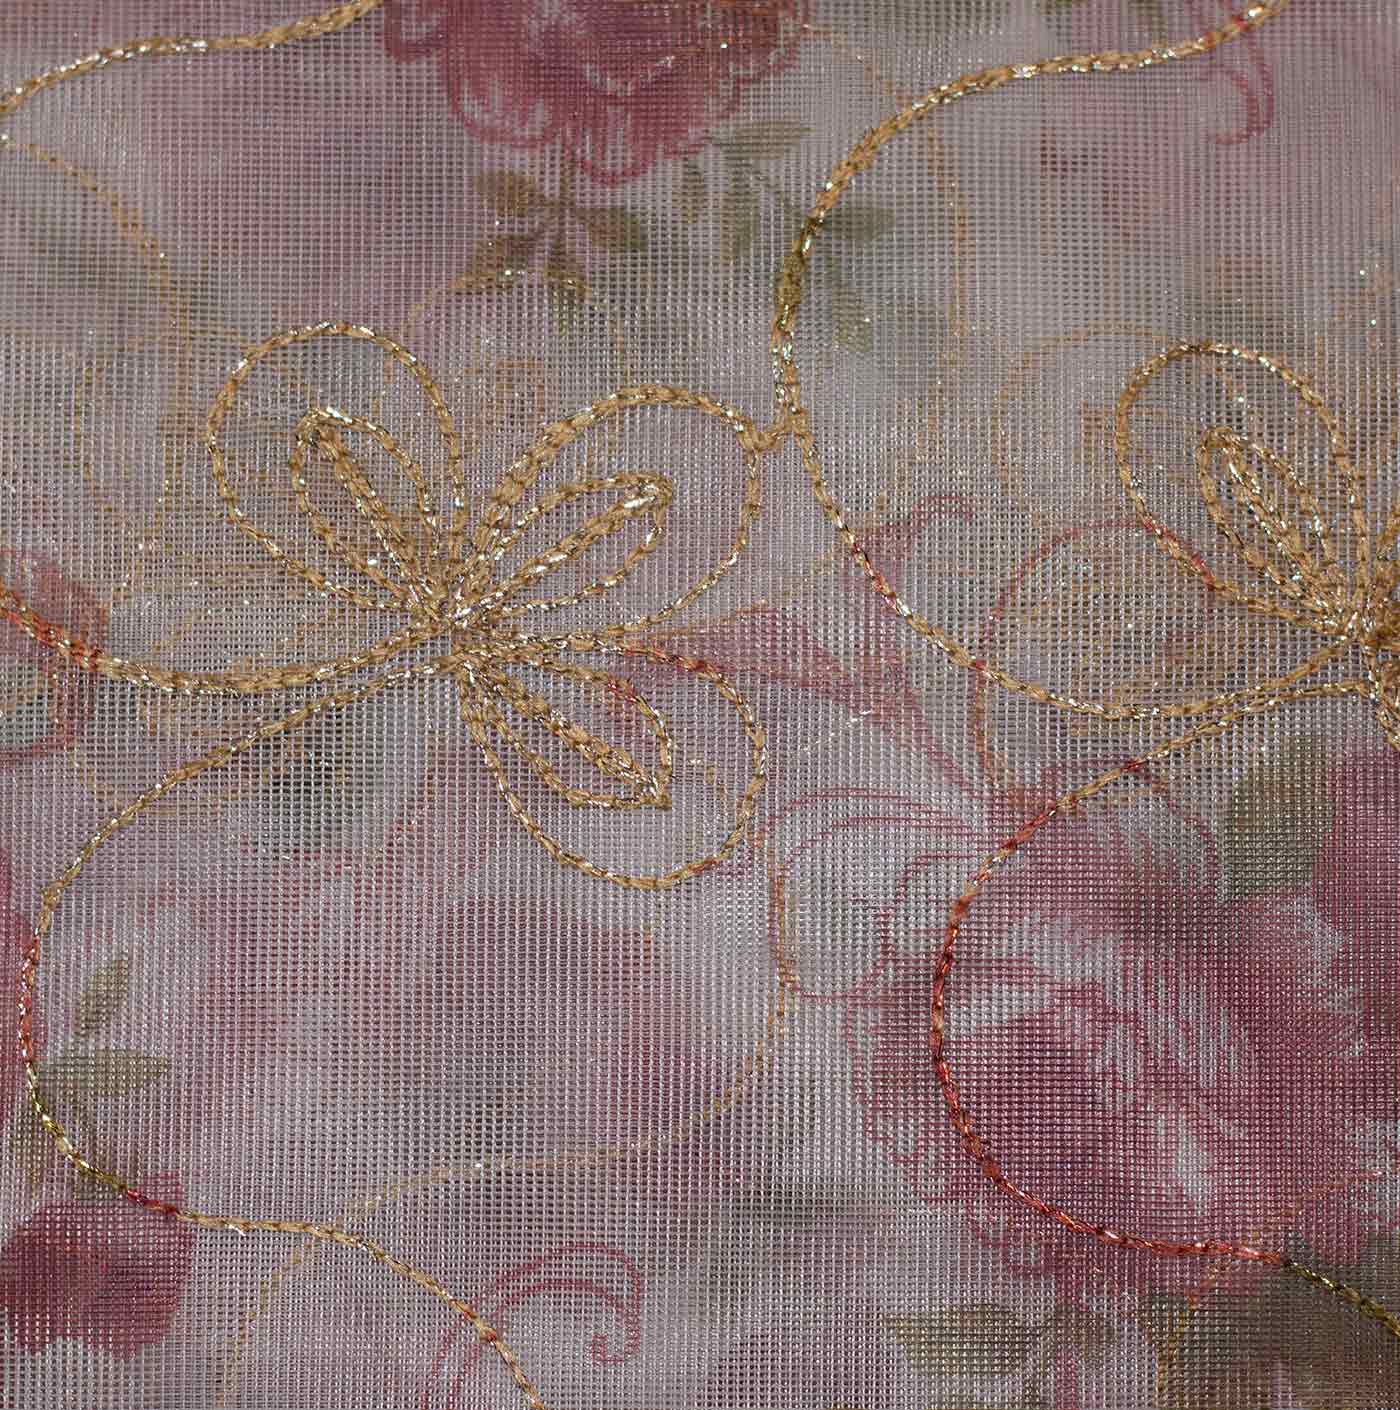 Pink Variant Embroidered Floral Mesh Fabric